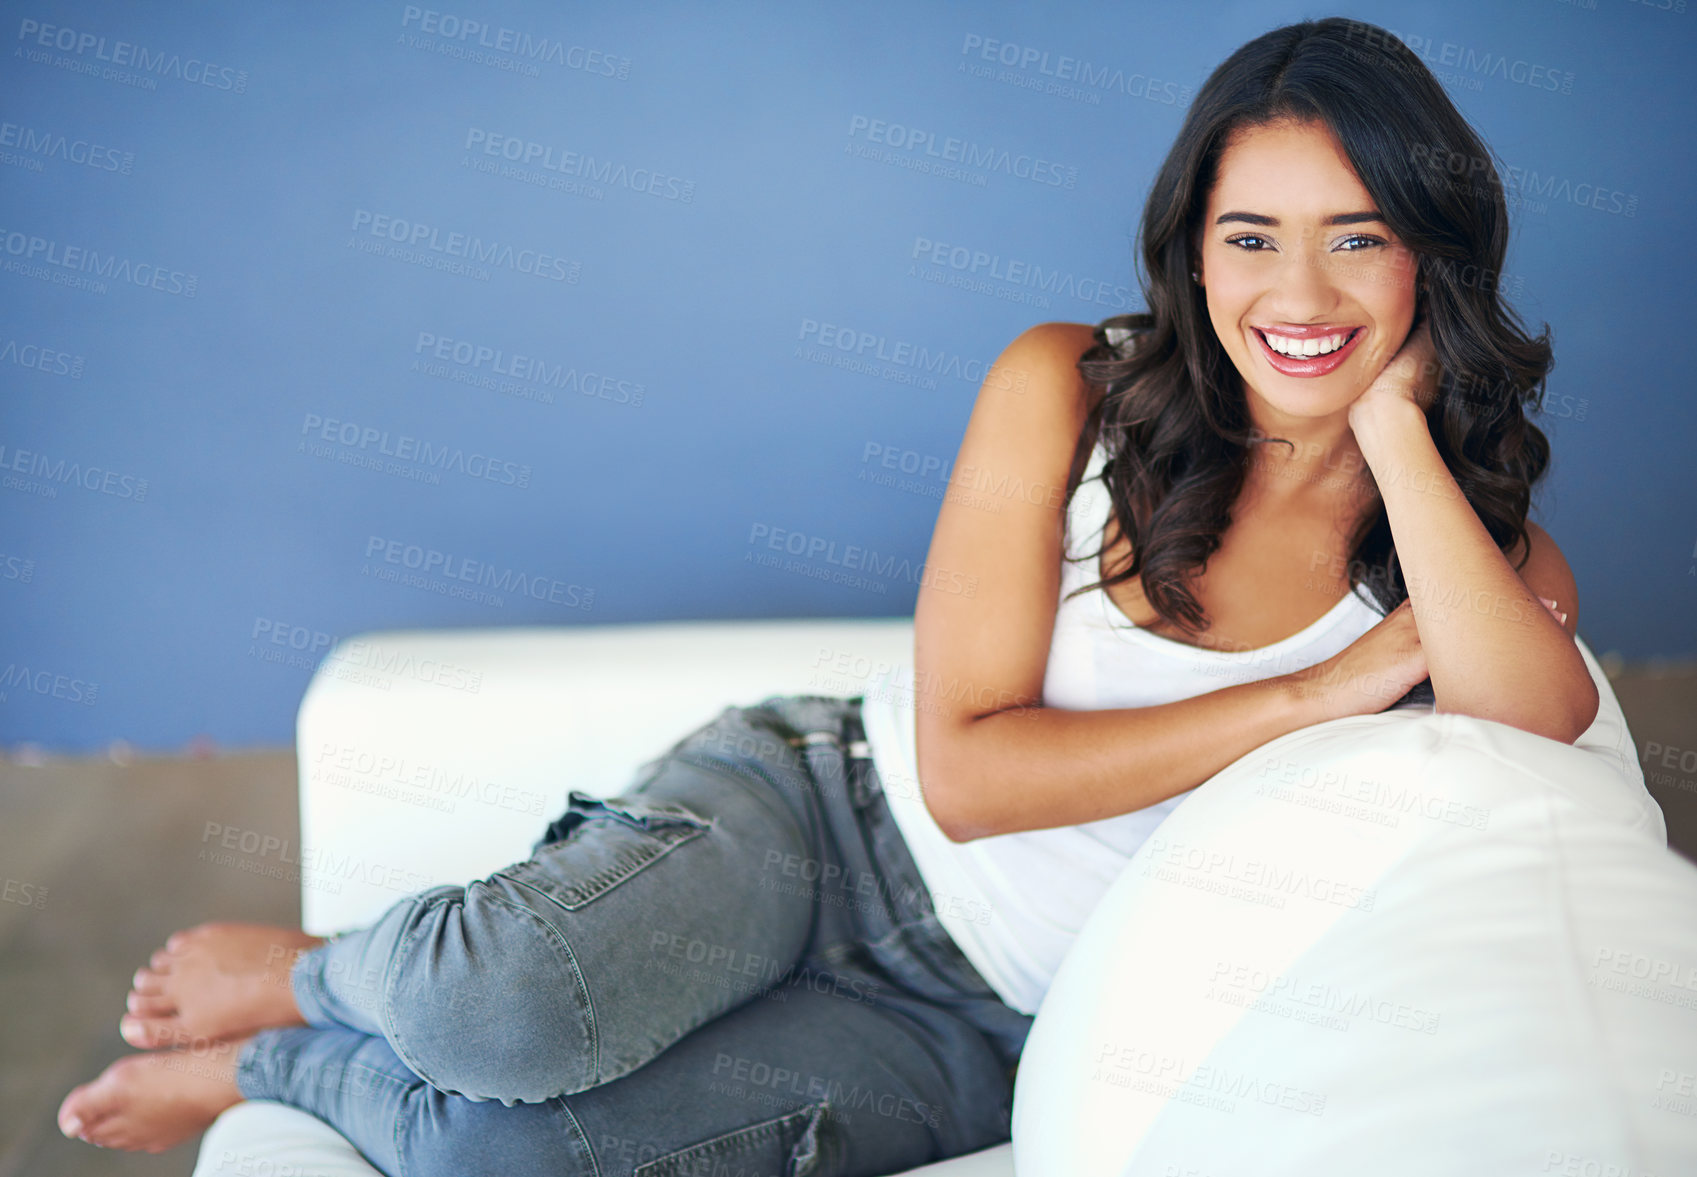 Buy stock photo Portrait of a young woman relaxing on the sofa at home